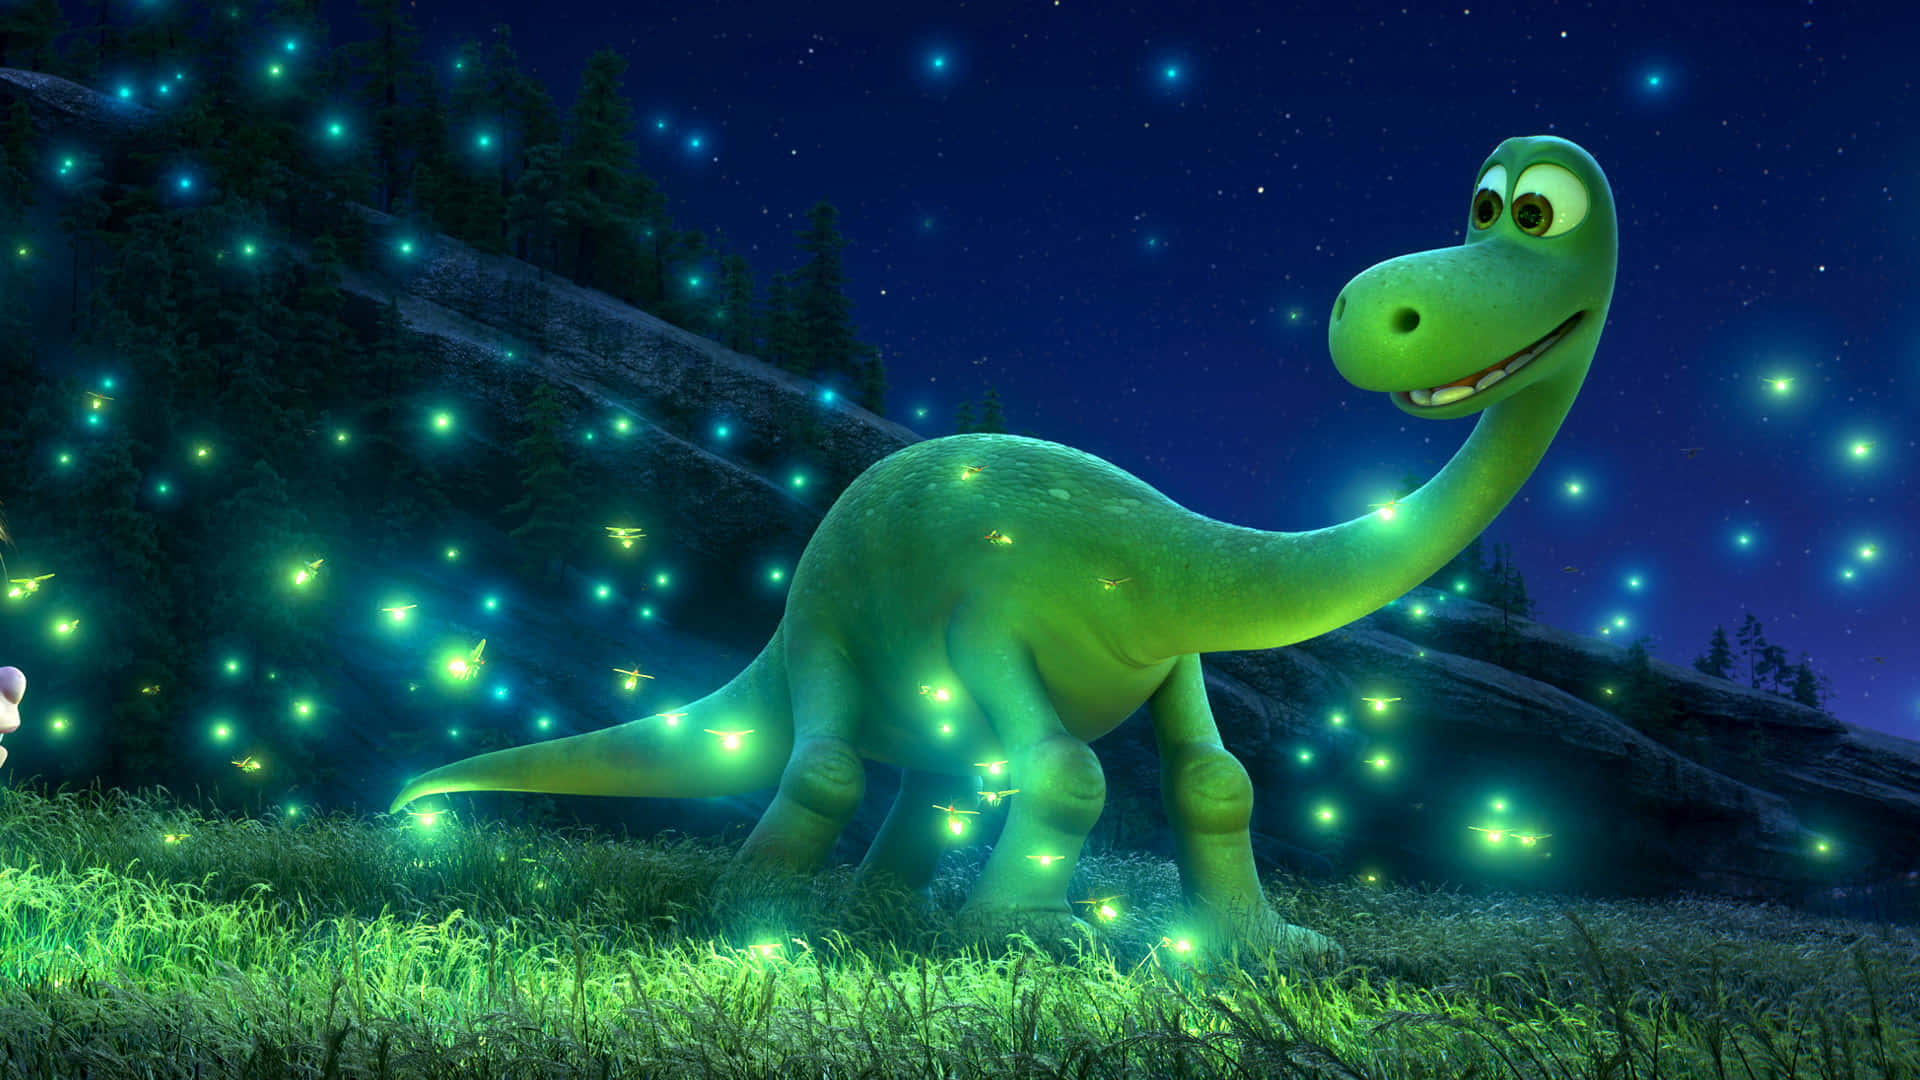 A green cartoon dinosaur standing on top of a hill, taking in the scenery.